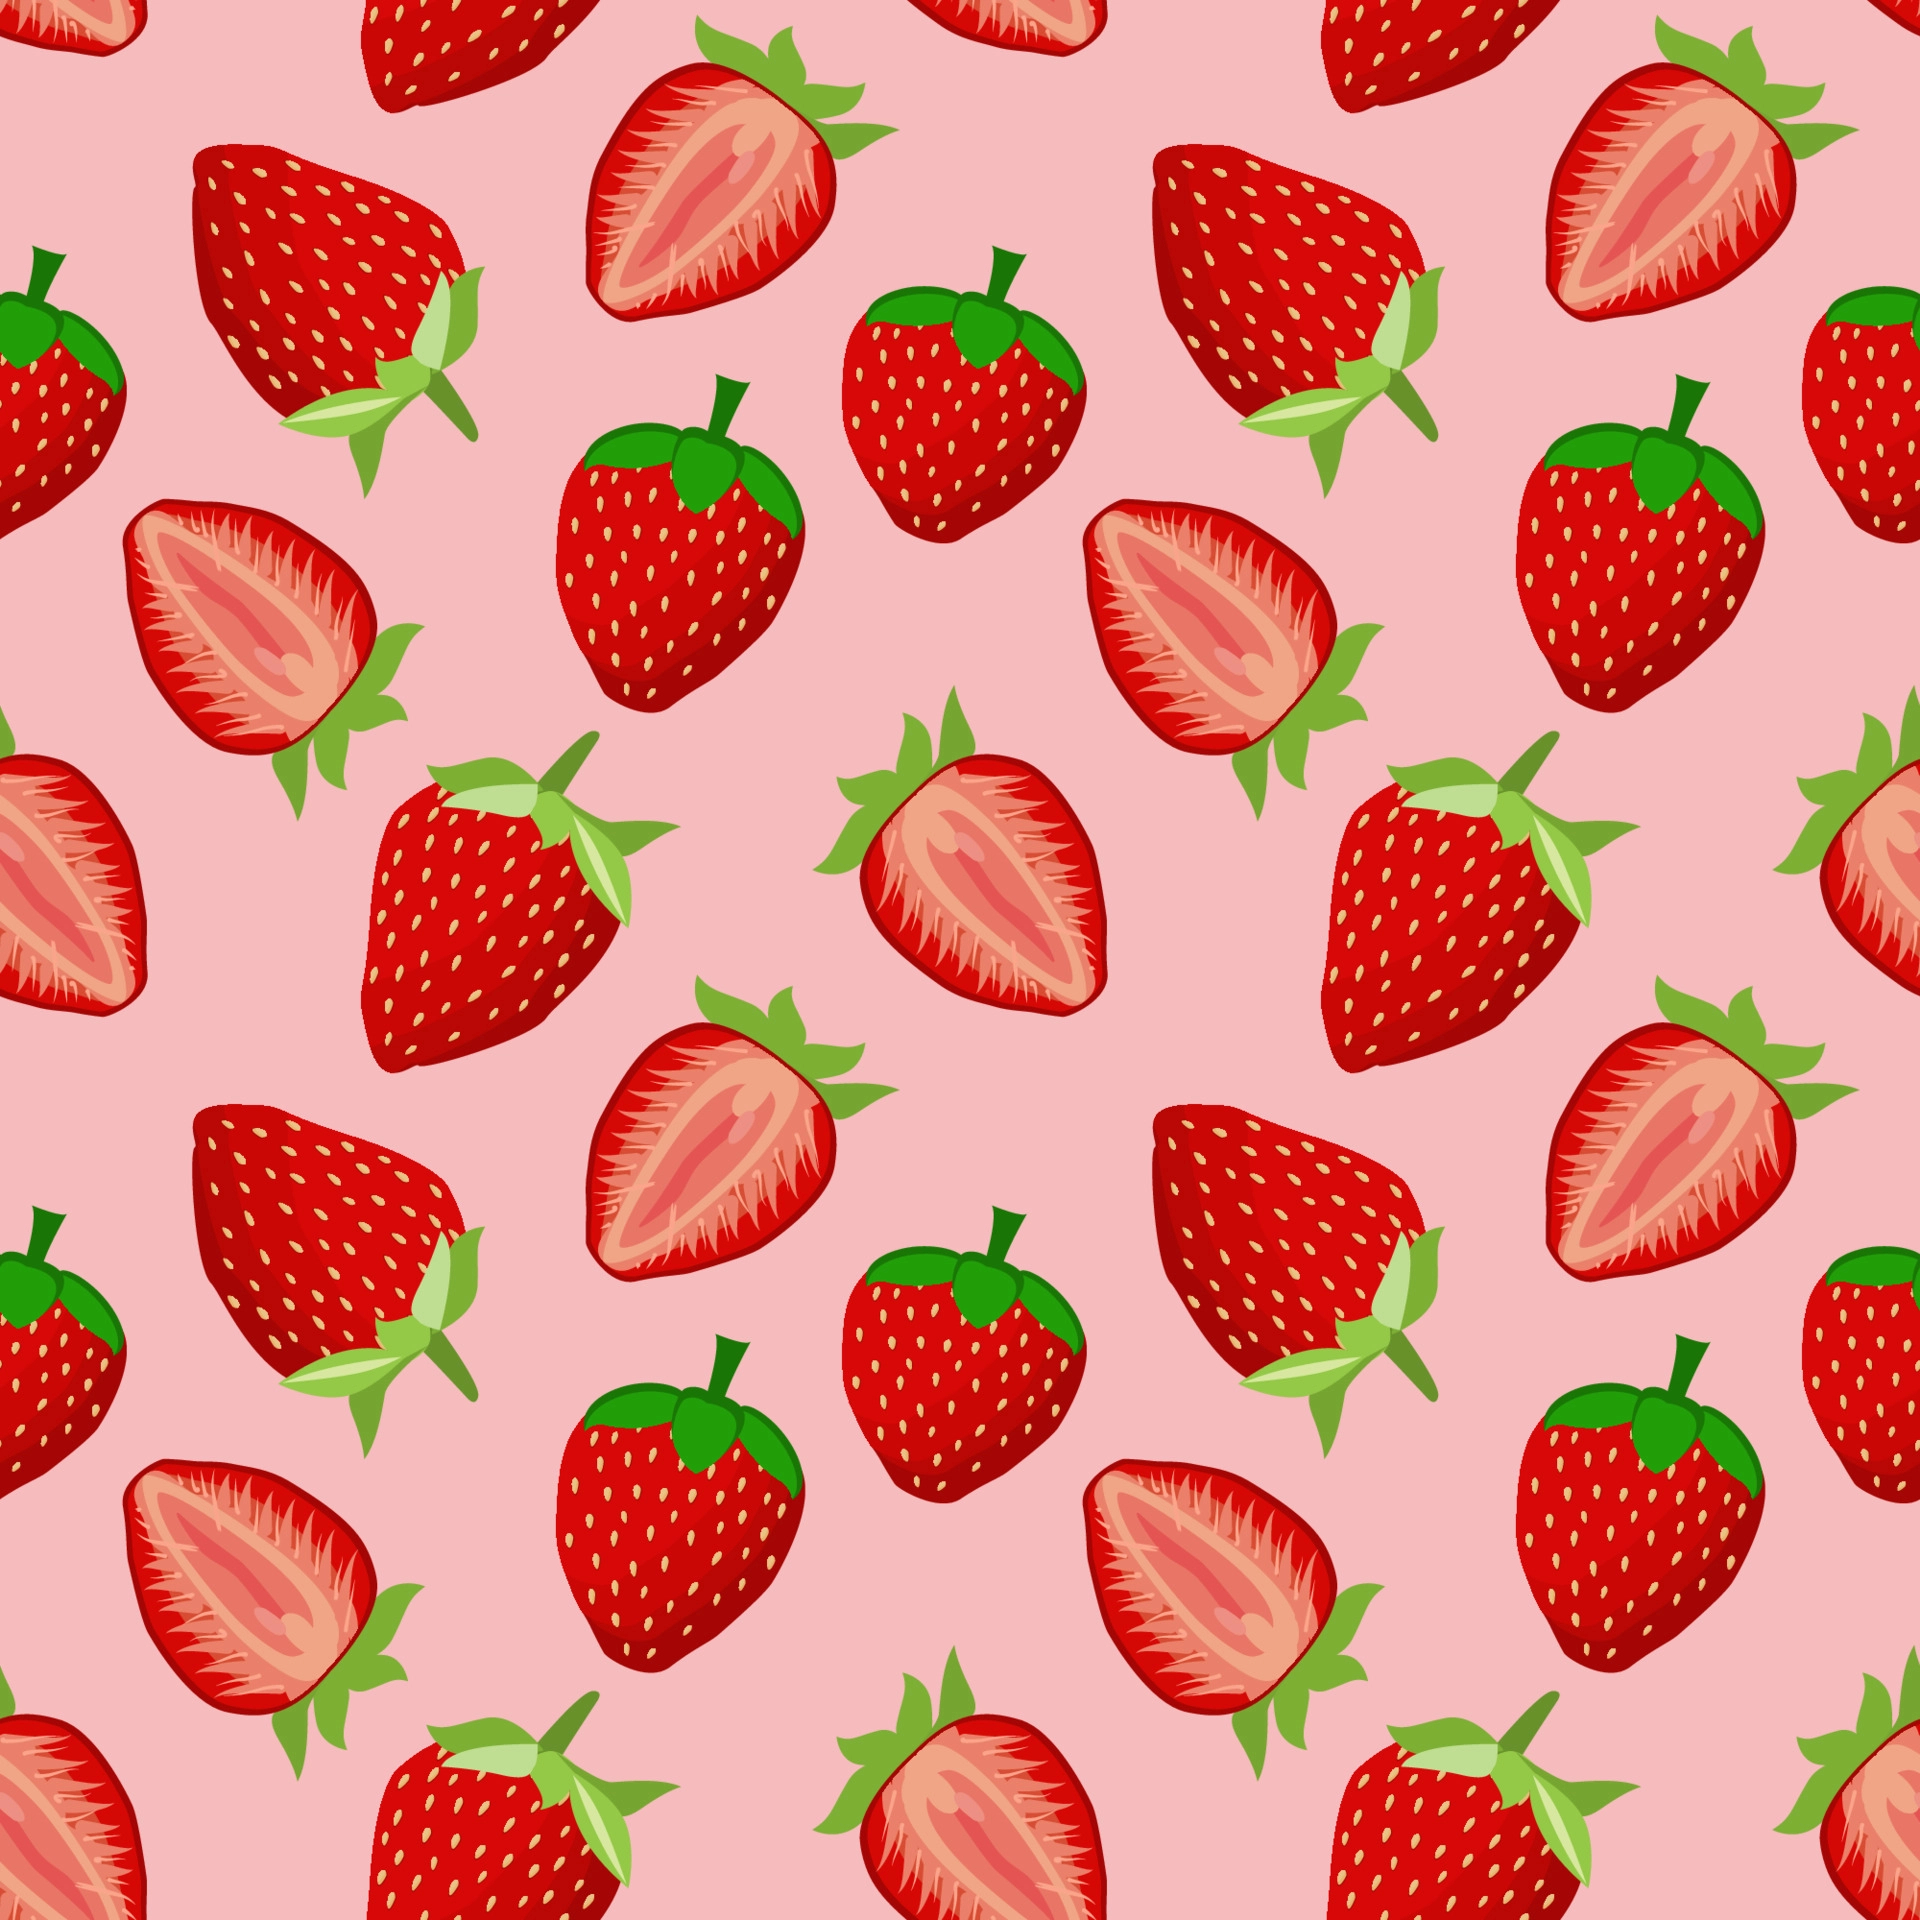 1920x1920 Cute strawberry cartoon seamless pattern vector Background design for kids, decorating, wallpaper, wrapping paper, fabric, backdrop 4964502 Vector Art